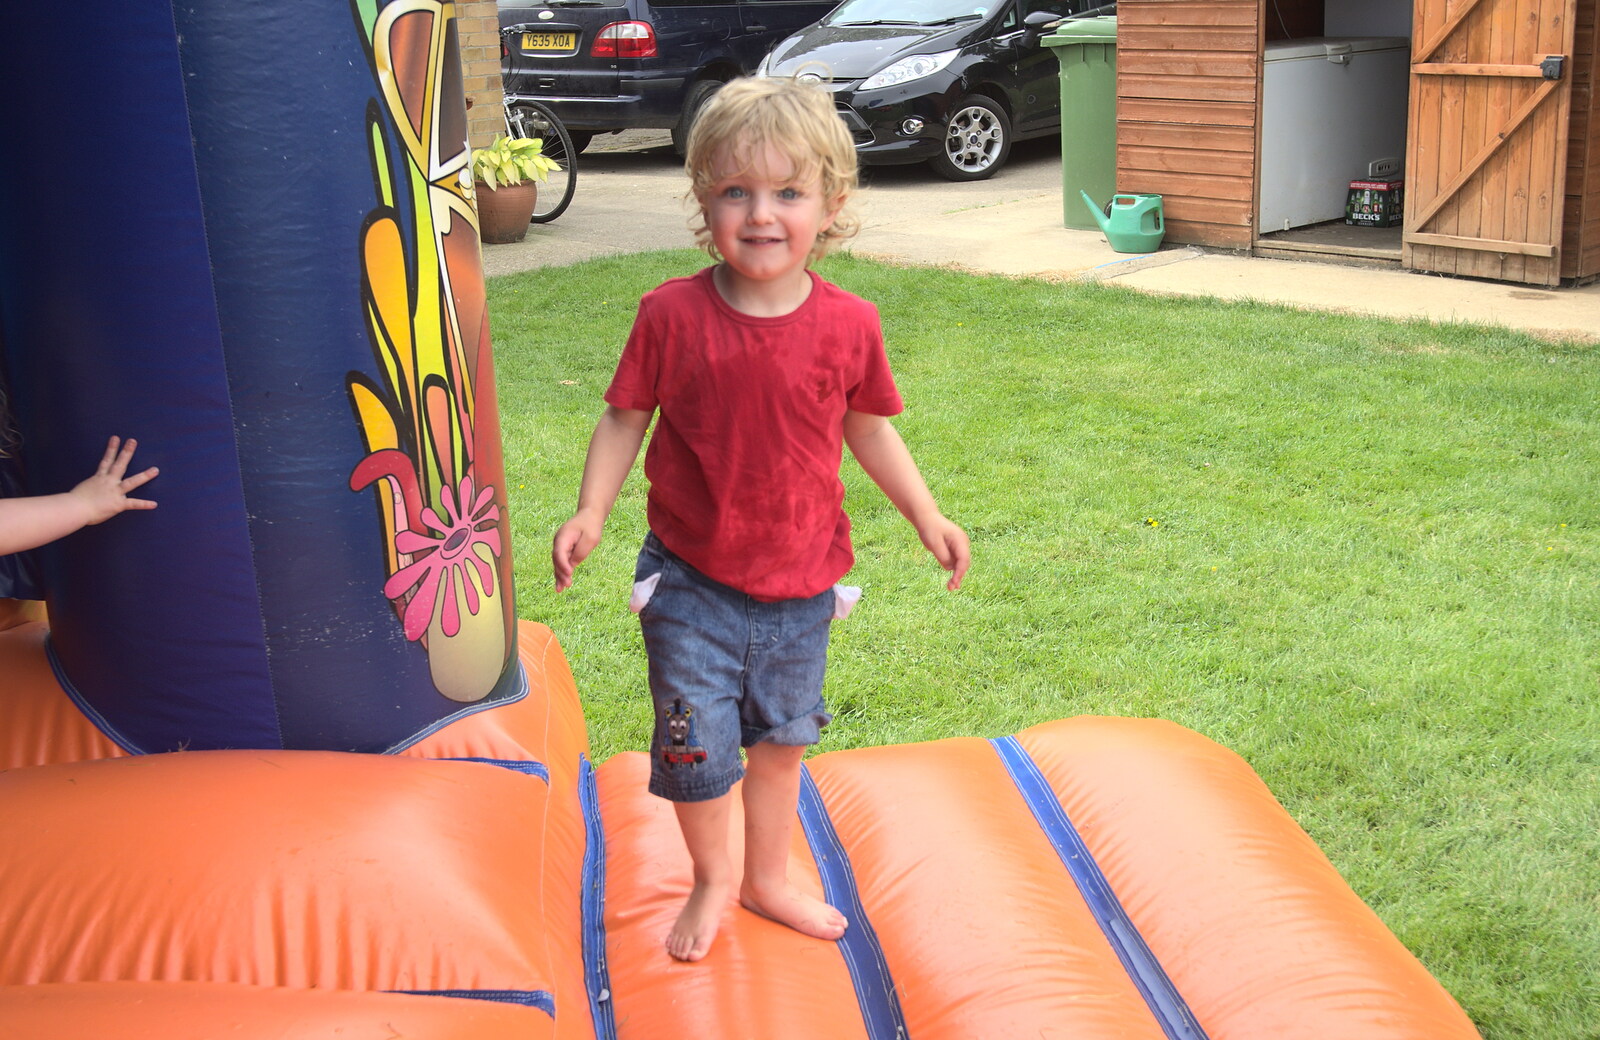 Fred's on a bouncy castle from "Grandma Julie's" Barbeque Thrash, Bressingham, Norfolk - 19th August 2012